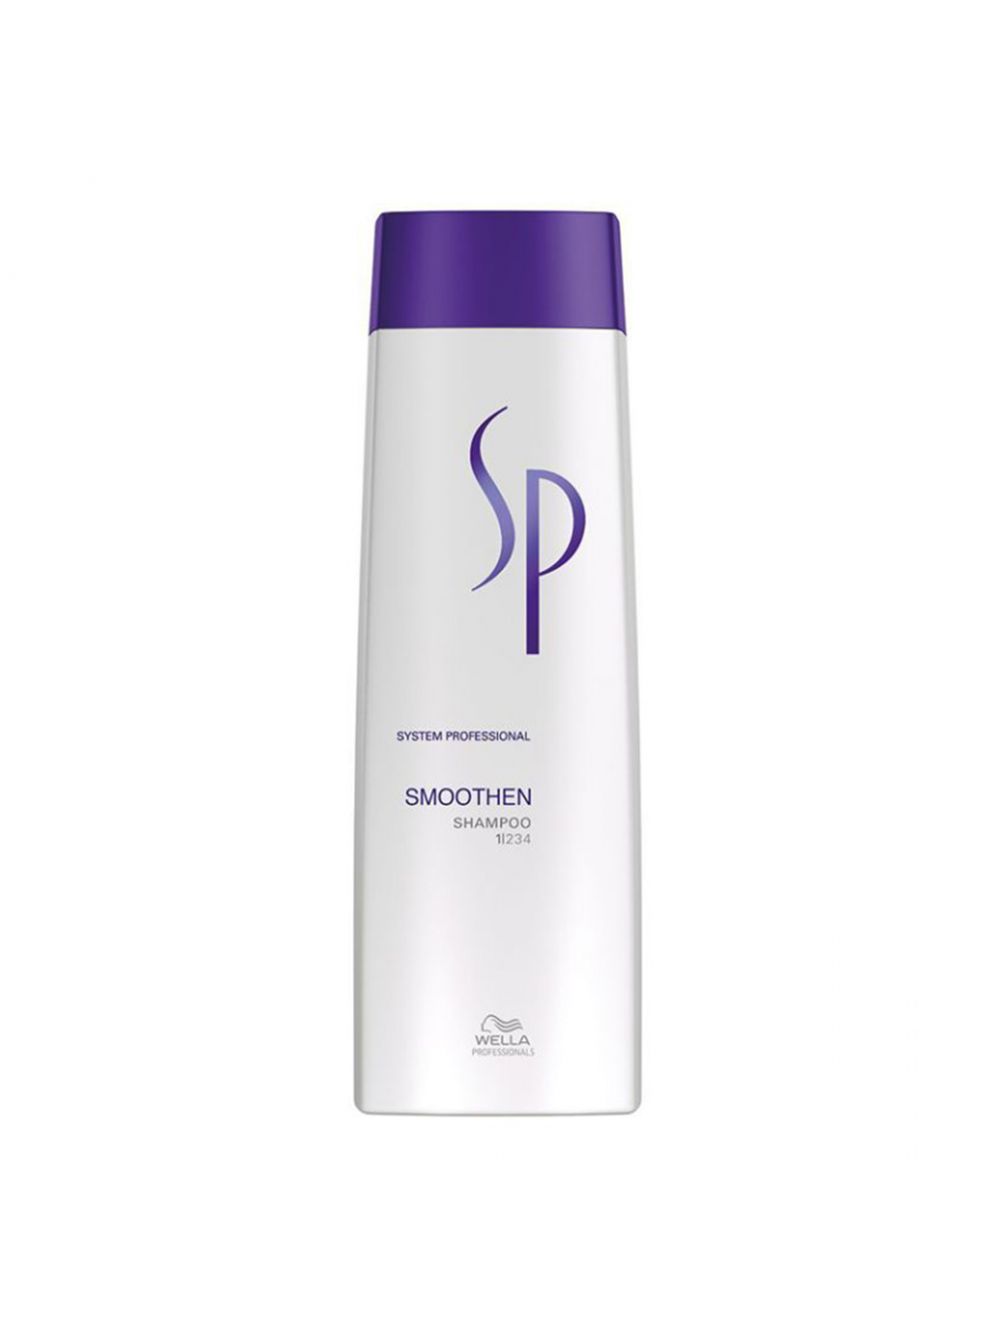 SP System Professional Smoothen Shampoo (250ml)